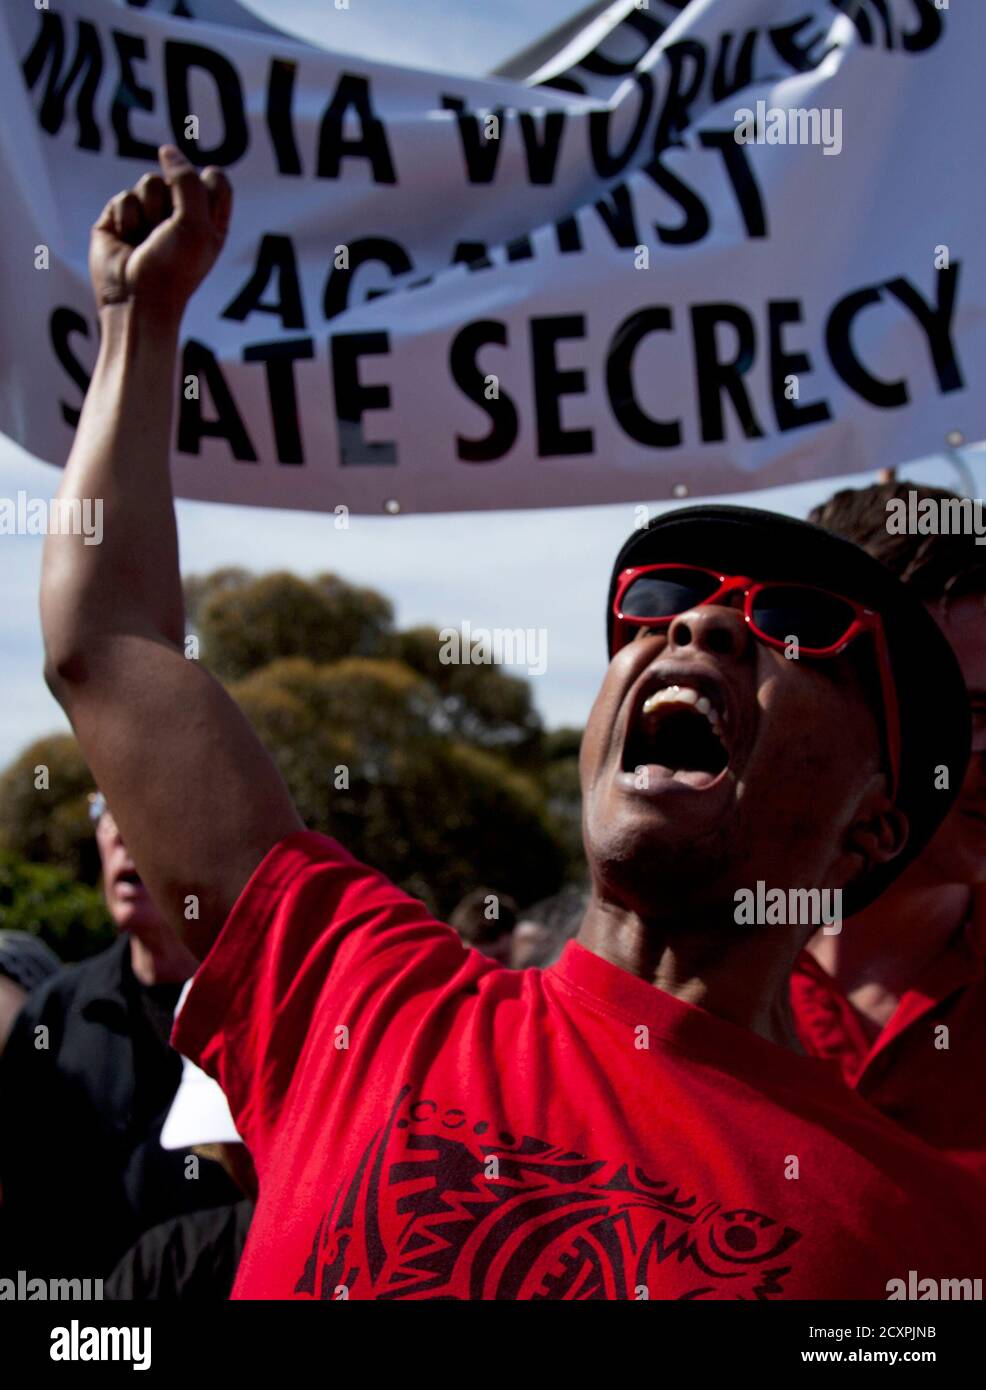 Protesters take part in a demonstration against the Protection of Information Bill in Cape Town September 17, 2011. South Africa's parliament is expected to pass shortly a much criticised state secrecy bill after removing provisions giving agencies broad power to keep information hidden and draconian penalties that critics likened to apartheid-era laws. Introduced by the Ministry of State Security in 2010, the draft law spooked investors worried that government agencies would hide from public view market-sensitive information, as well as journalists who faced up to 25 years in jail for illegal Stock Photo